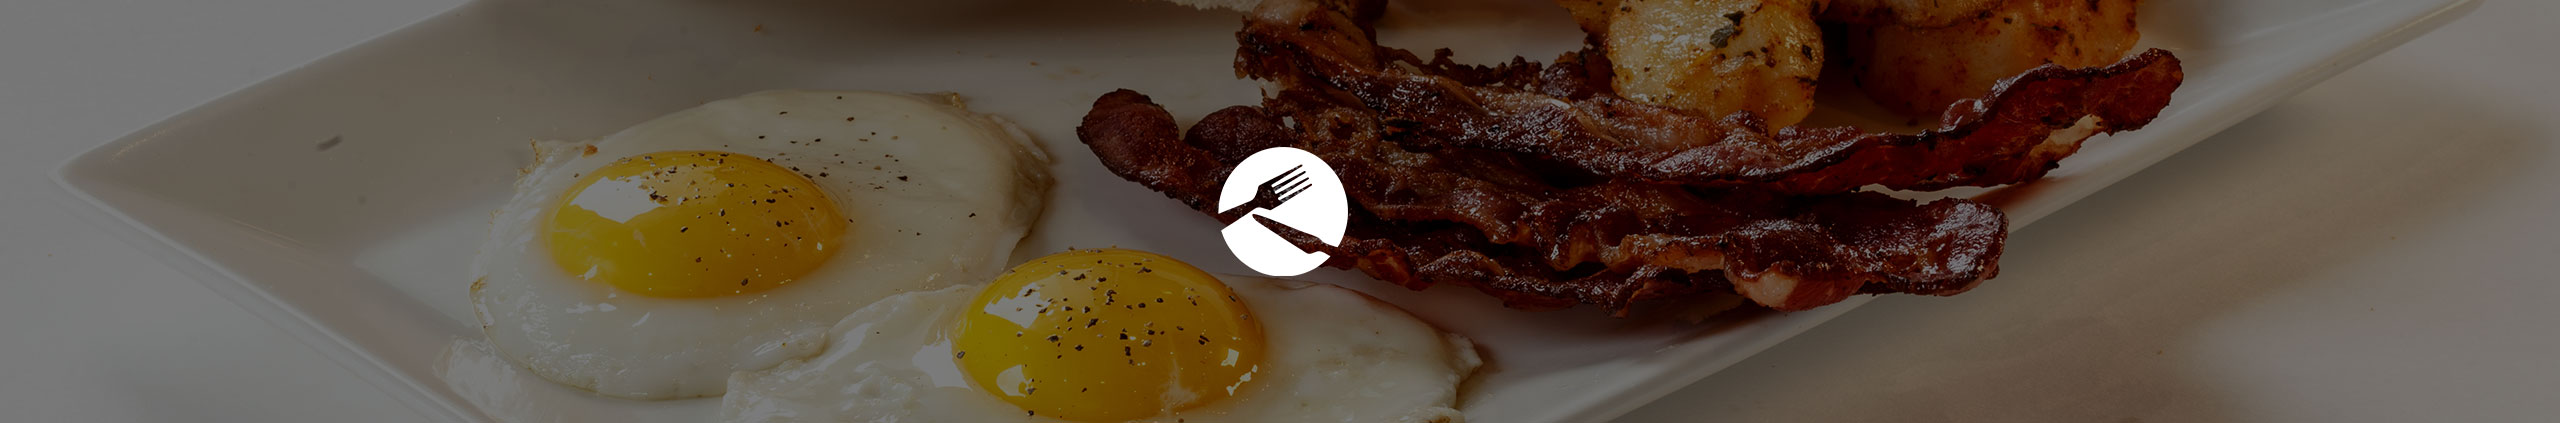 two eggs sunny side up with bacon